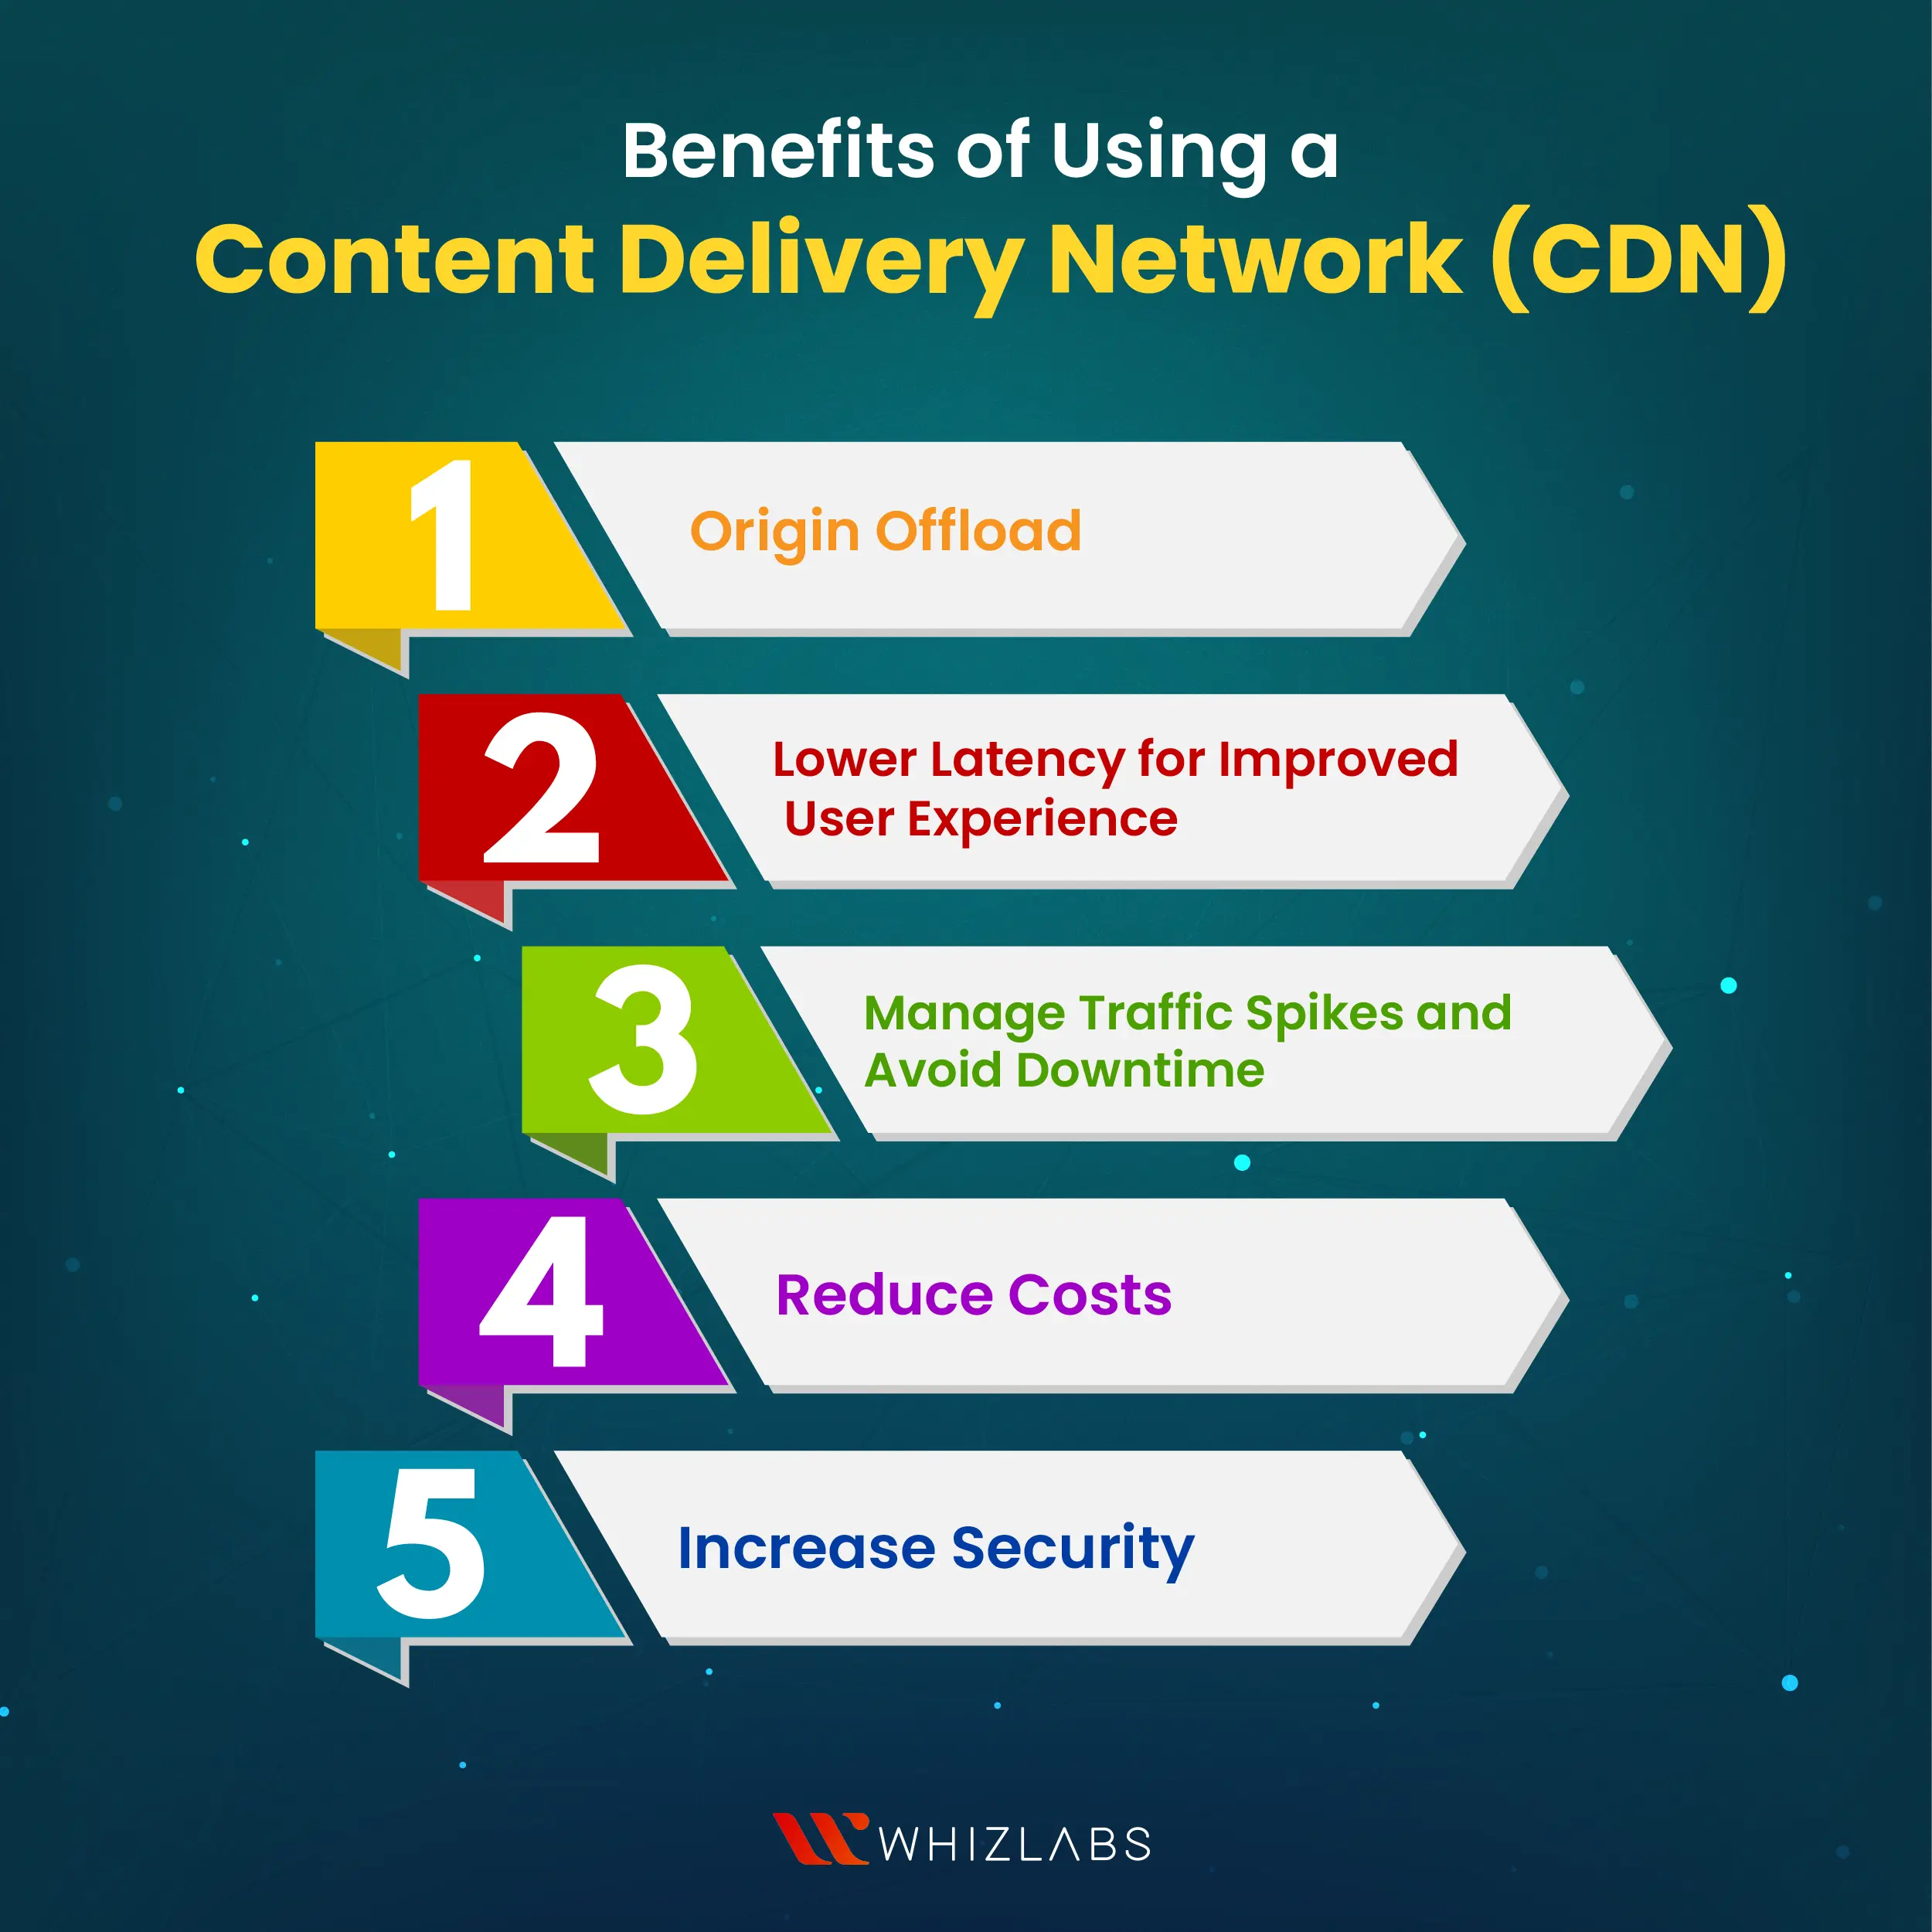 Benefits of Content Delivery network